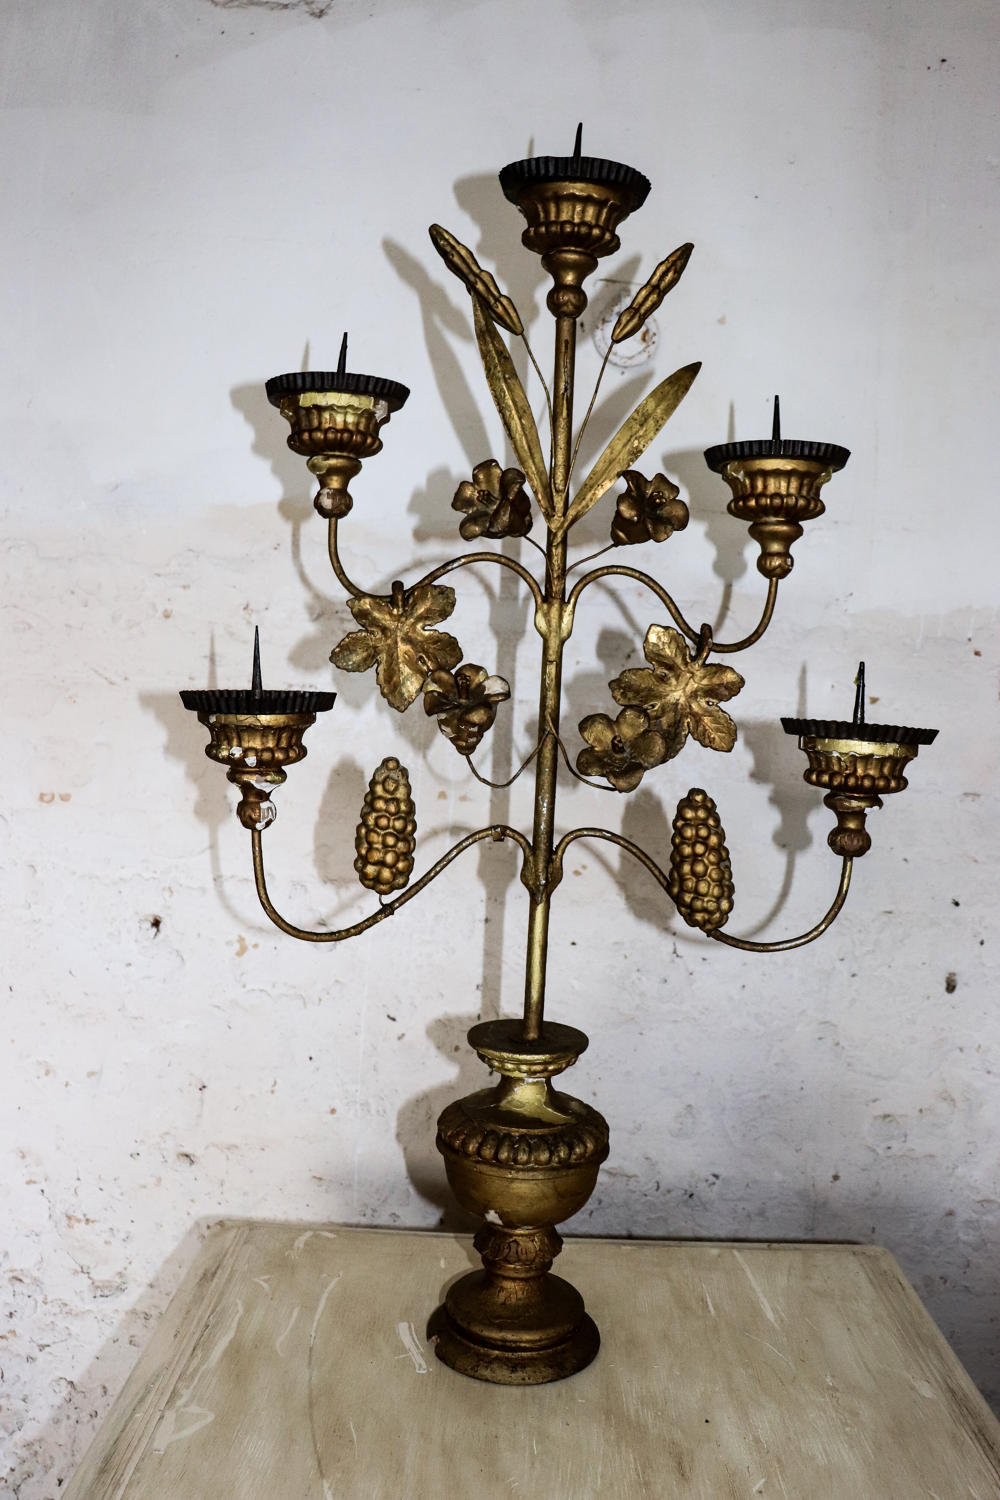 Early 19th century German giltwood and metal candelabra